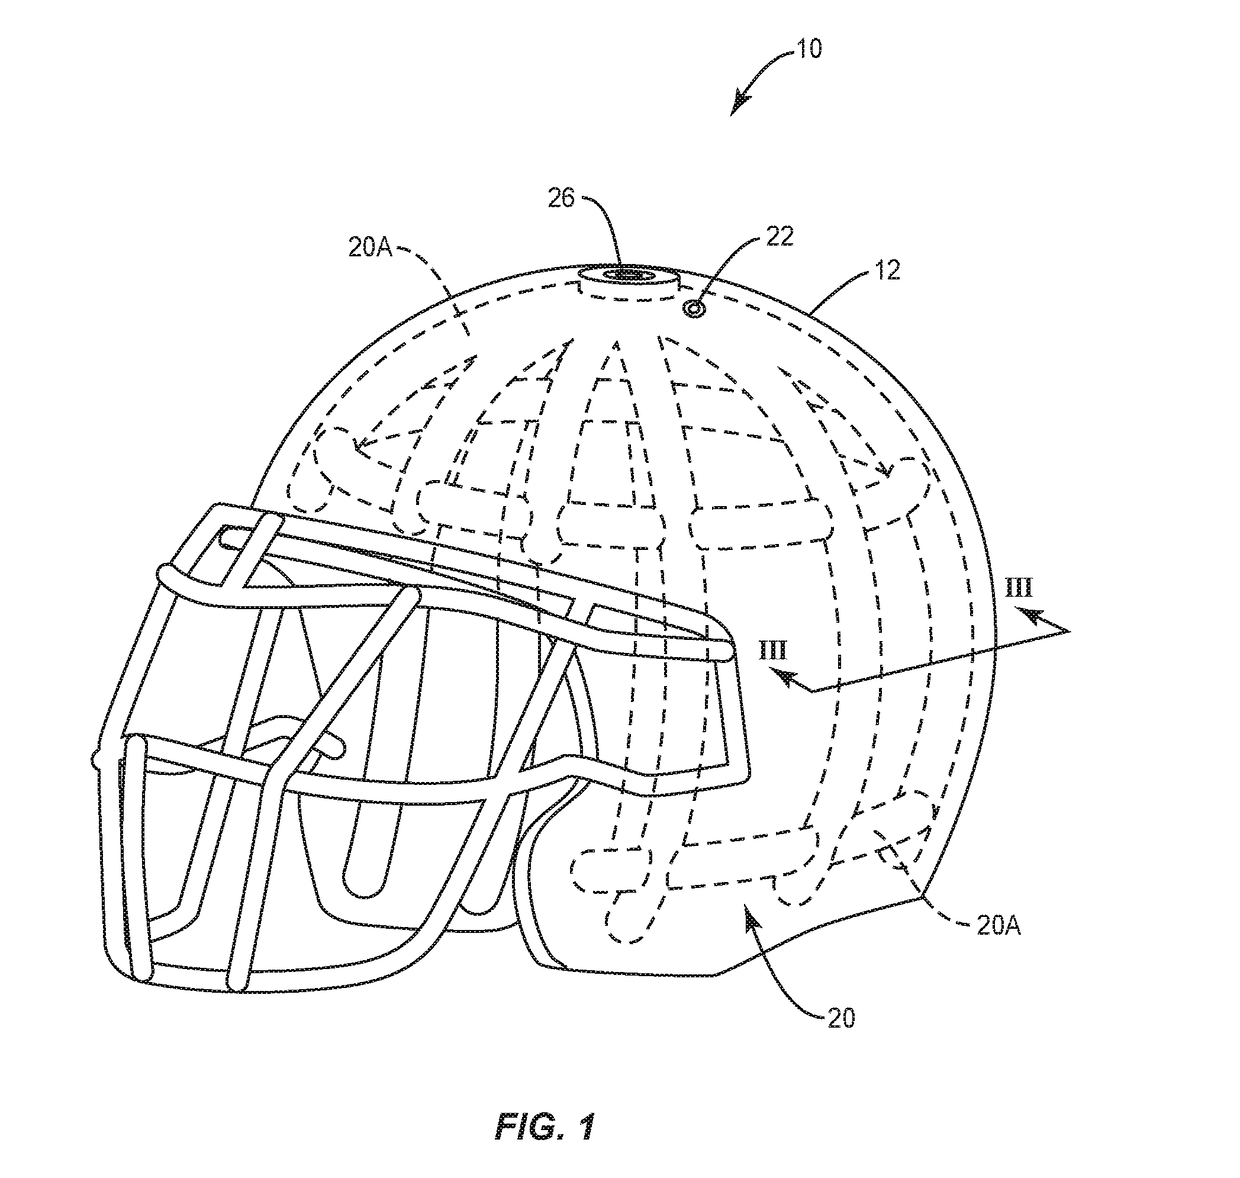 Helmet for preventing concussions